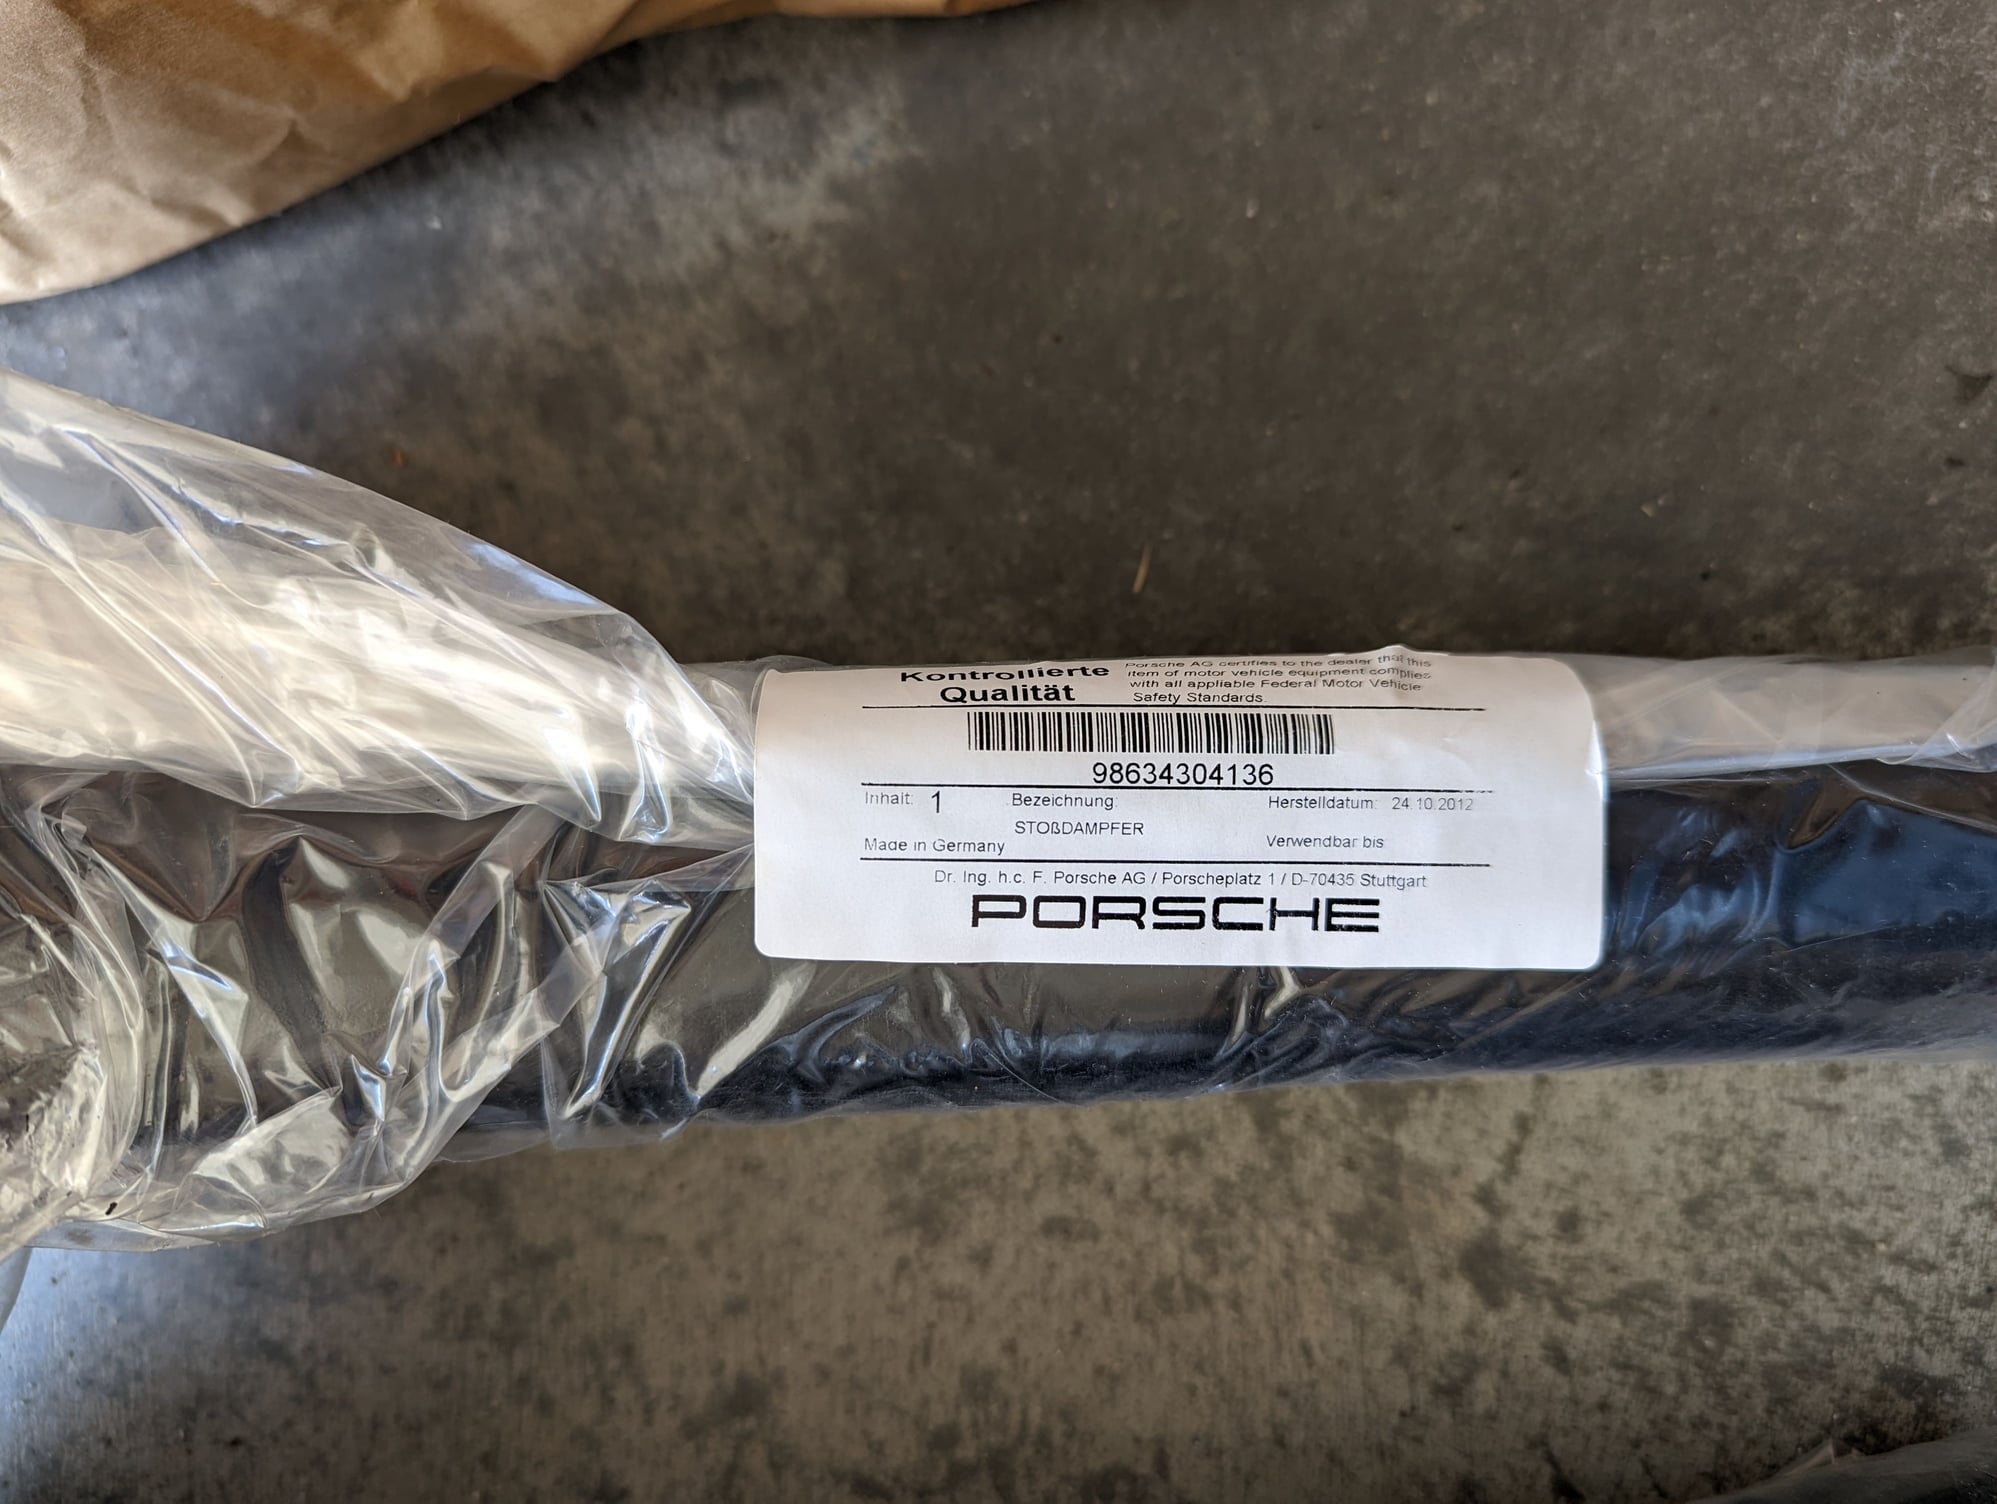 Steering/Suspension - 986 Boxster ROW M030 Euro Suspension Retrofit Kit - New - 1997 to 2004 Porsche Boxster - Holly Springs, NC 27540, United States